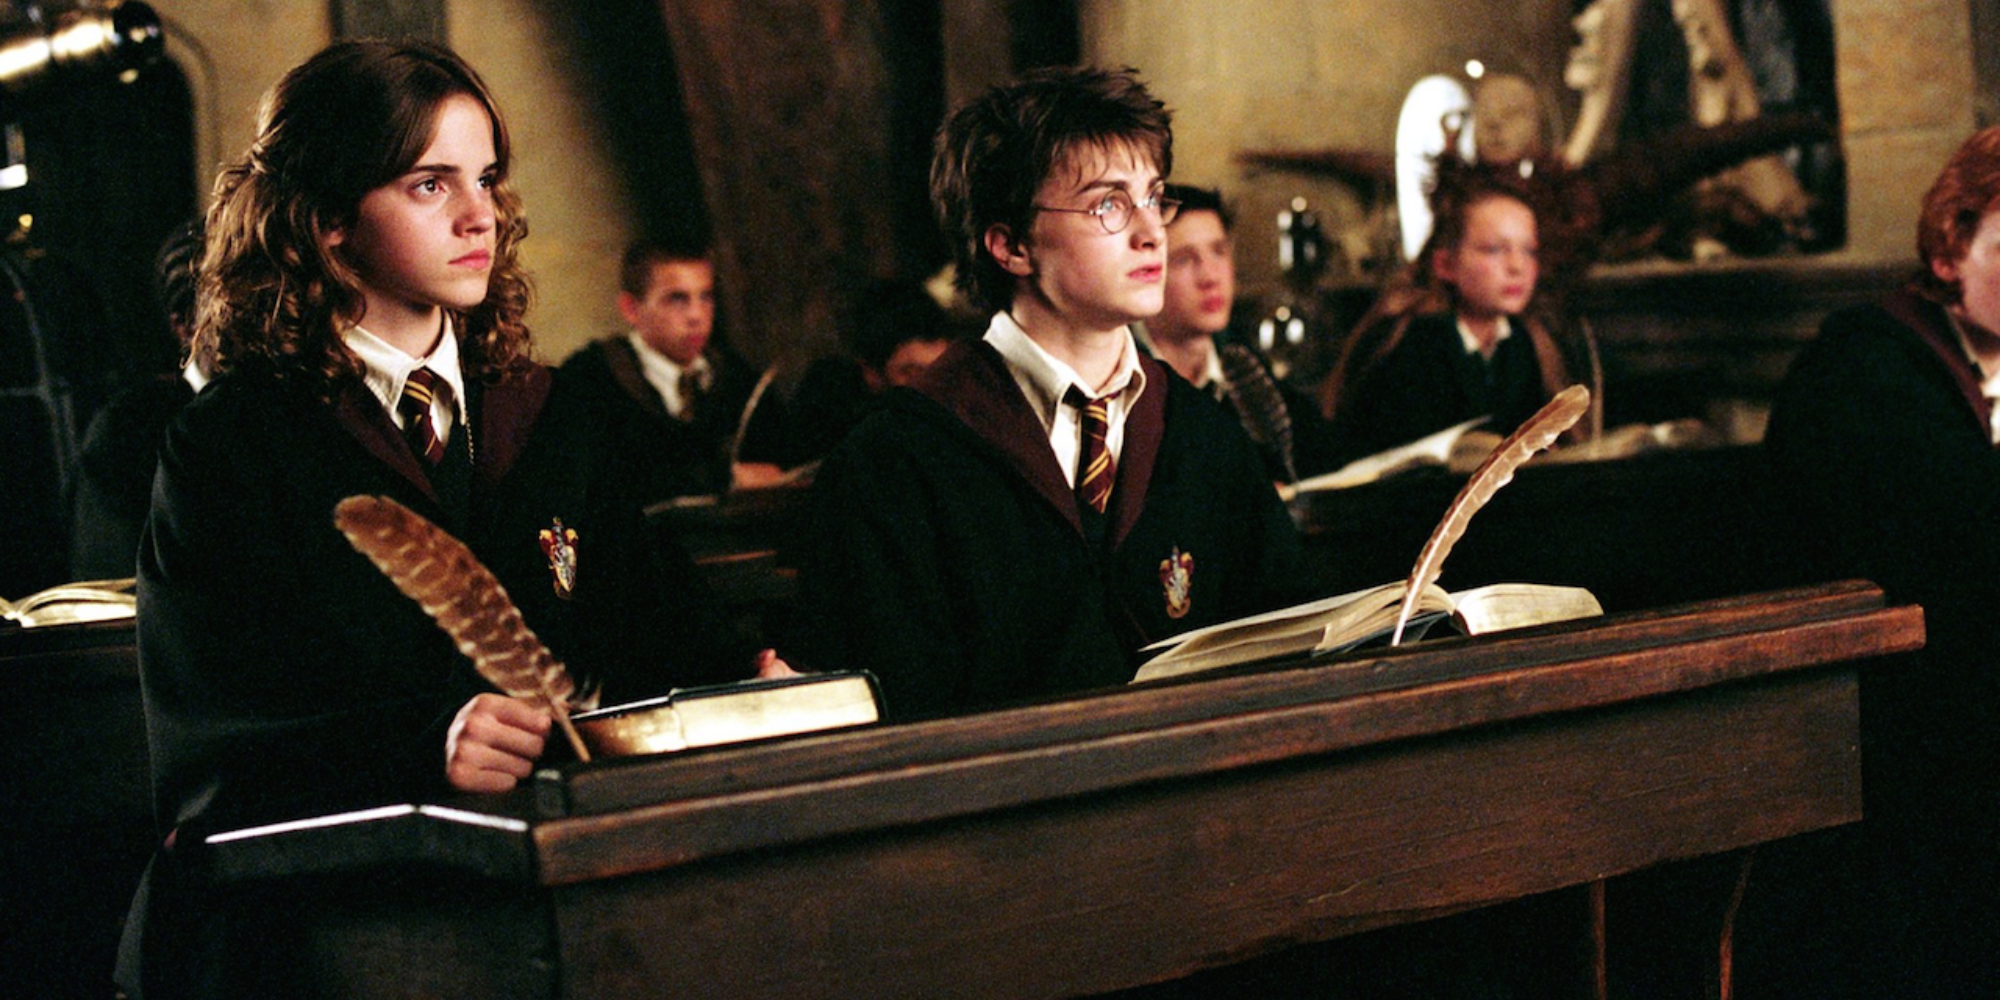 Hermione and Harry at class in Harry Potter and the Prisoner of Azkaban.